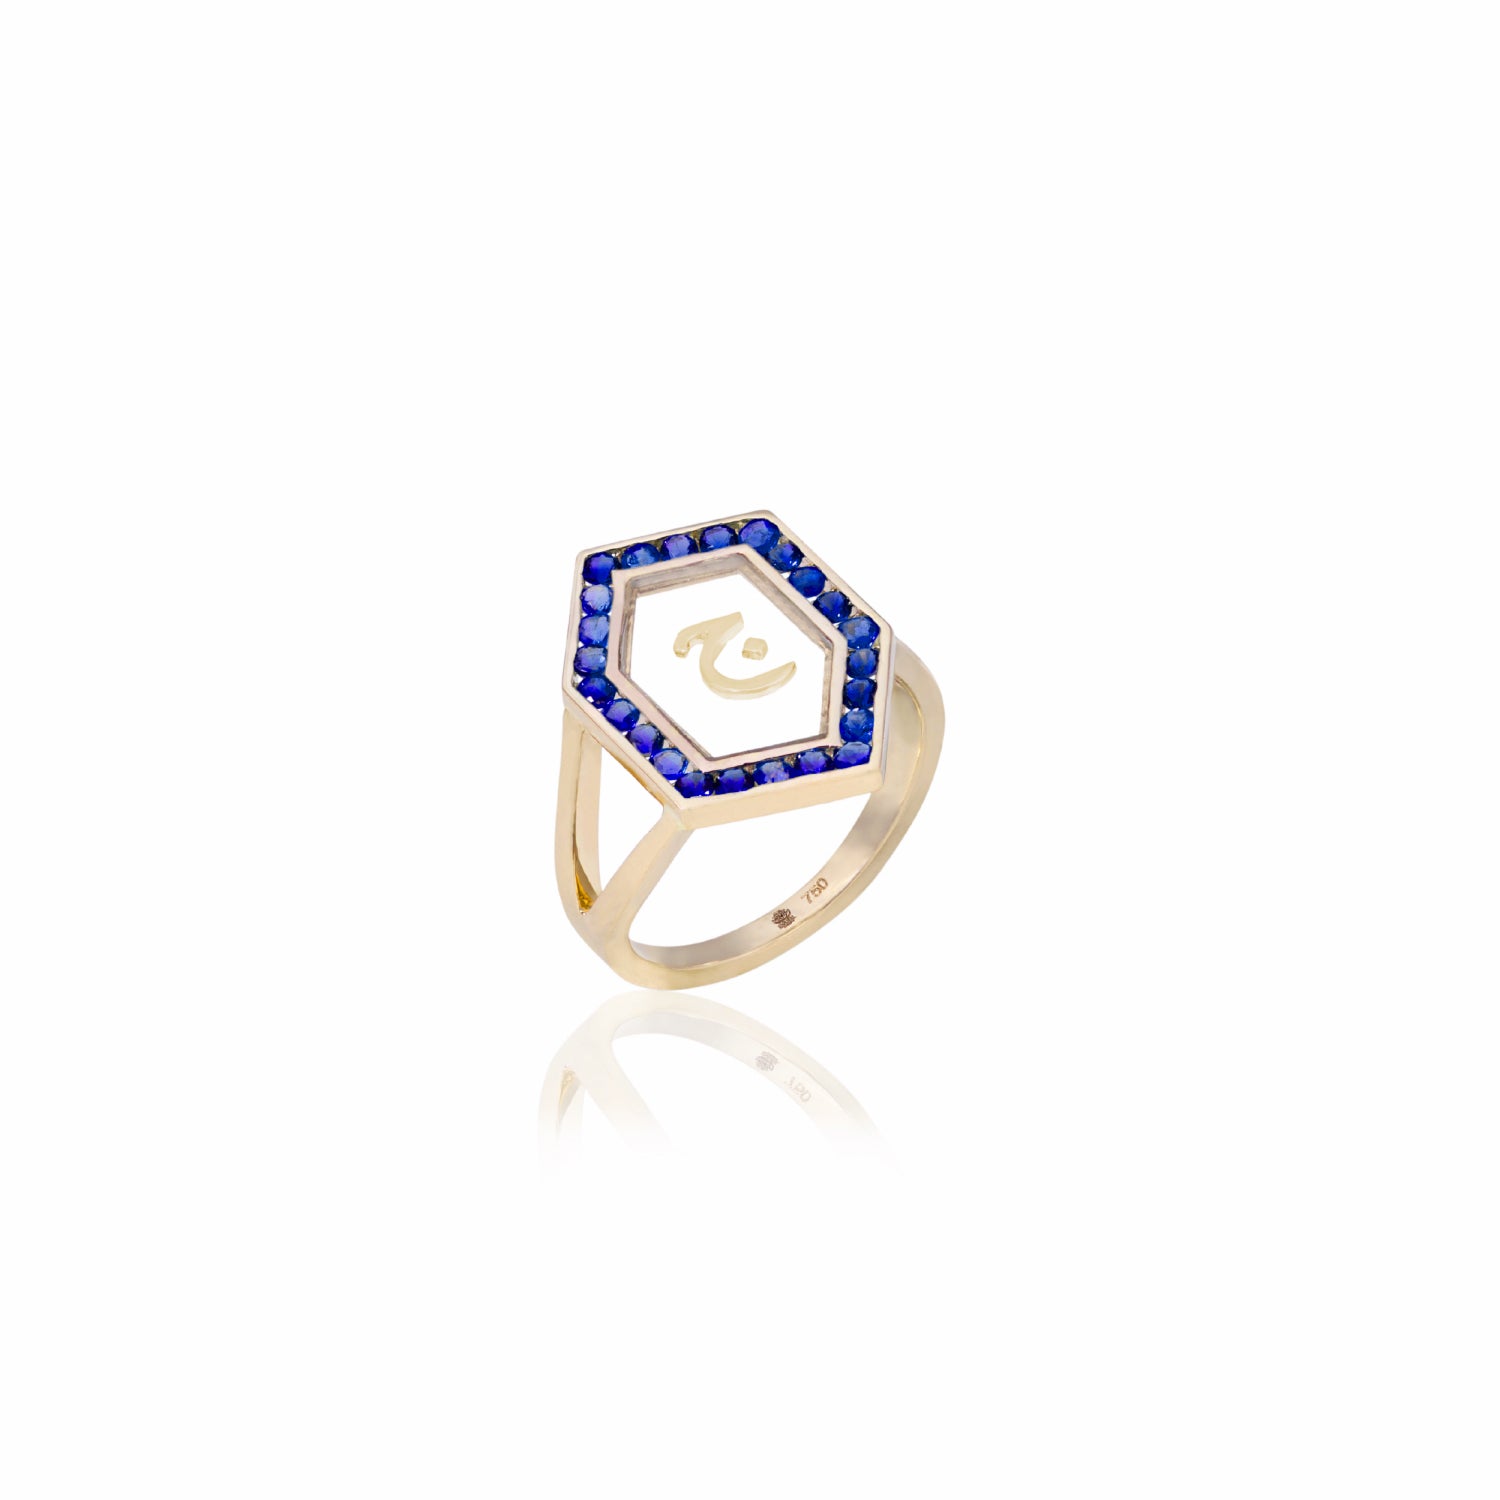 Qamoos 1.0 Letter ج Sapphire Ring in Yellow Gold